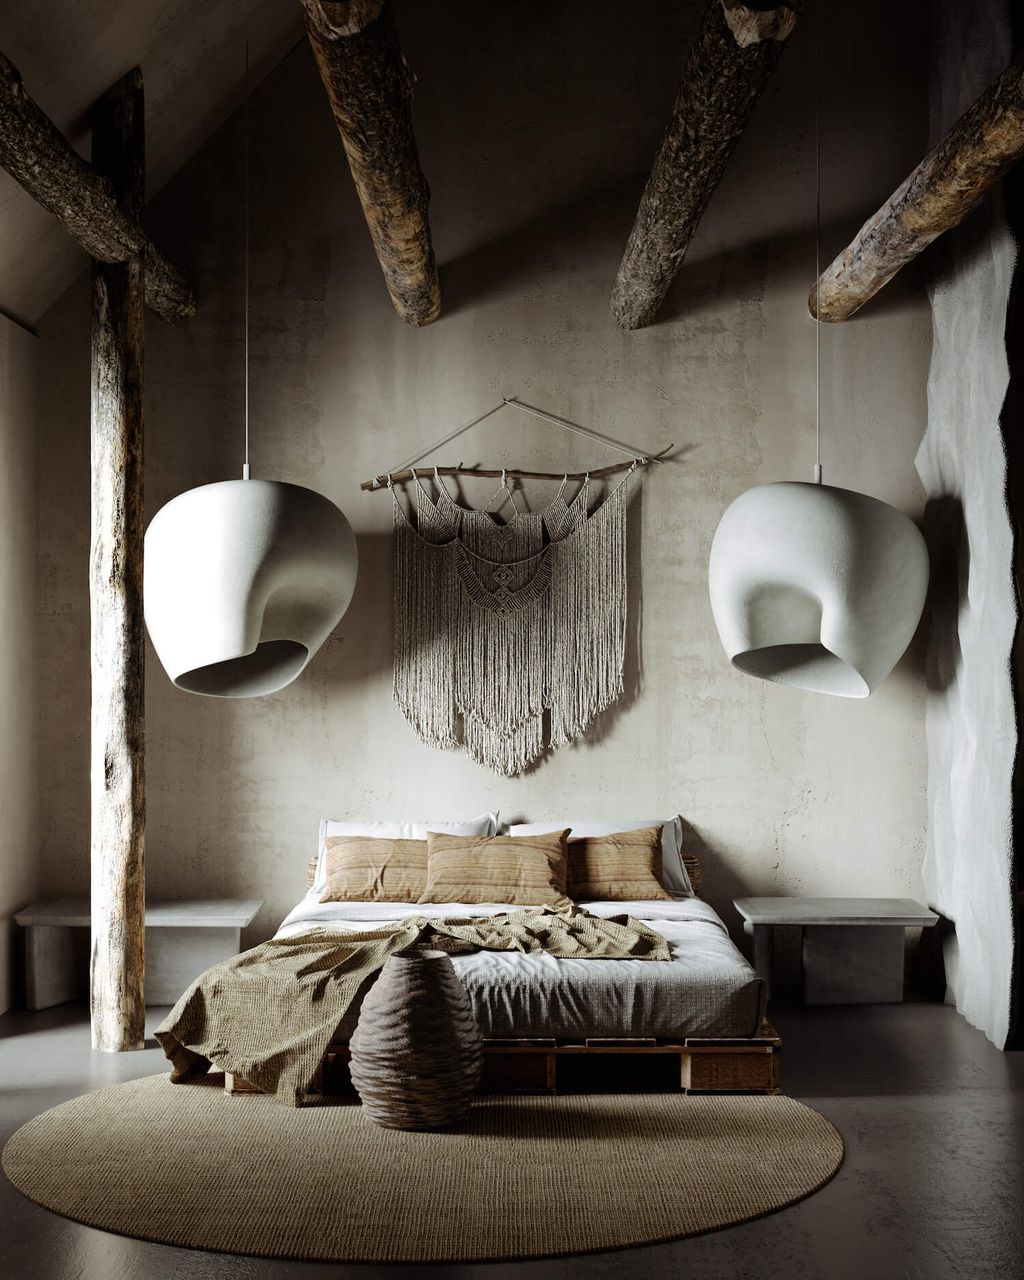 Rustic bedroom with decorative wall thread hanging and natural colors